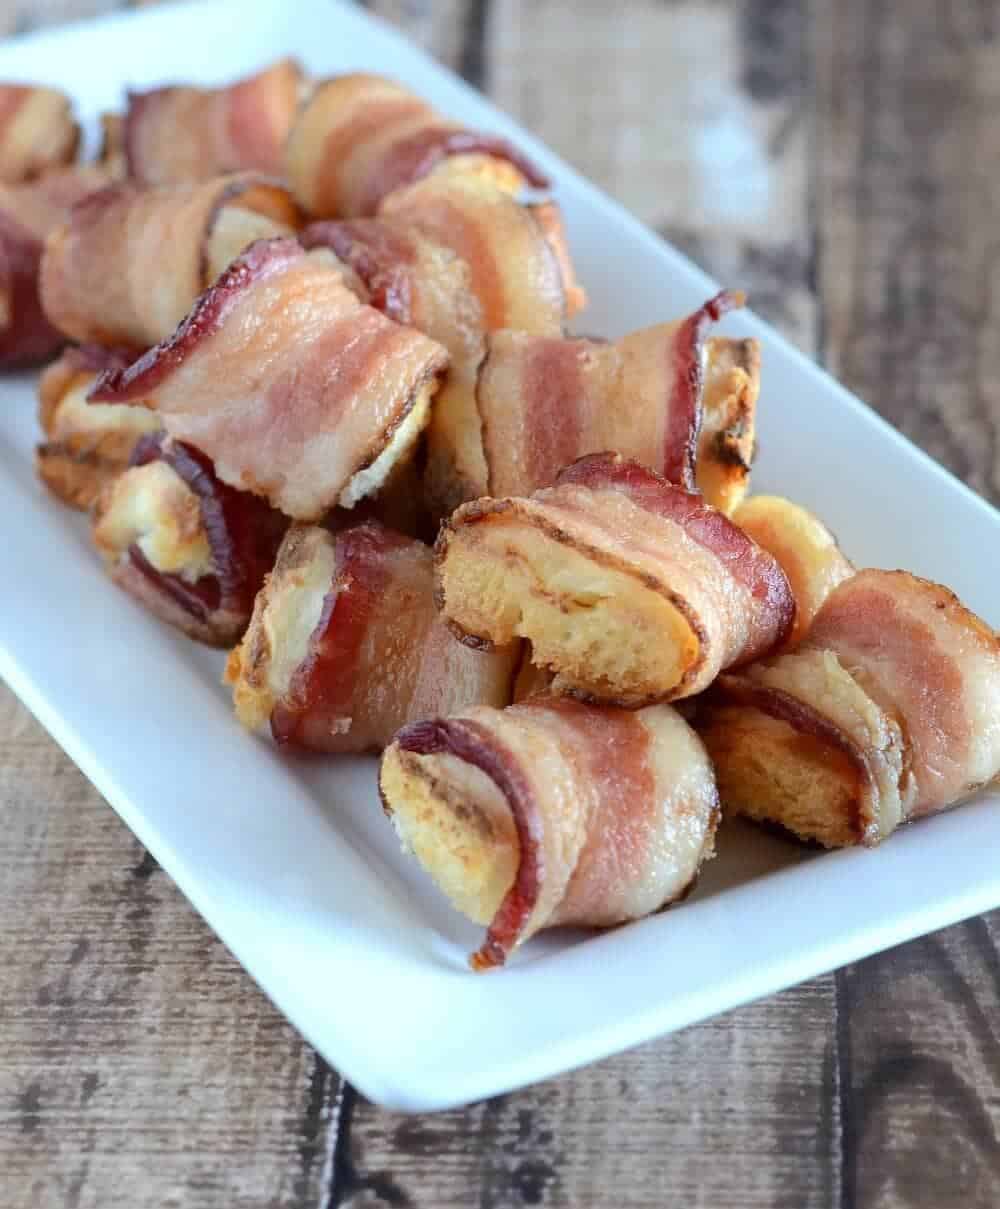 Plate of bacon cream cheese bites.